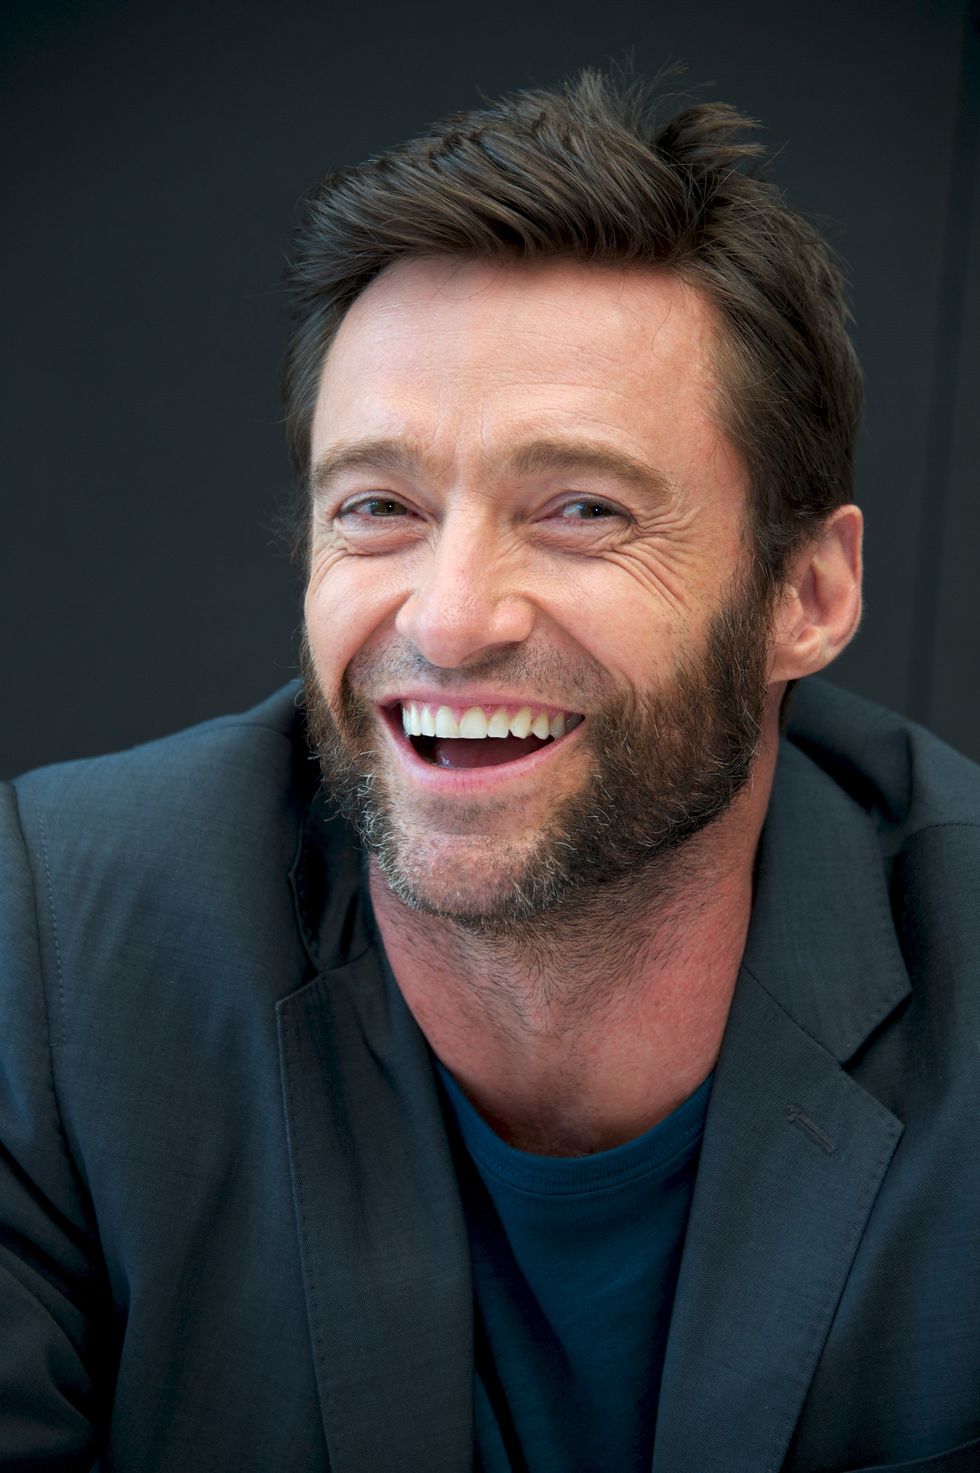 jackman with the wolverine mutton chops at a press conference for ﻿the wolverine﻿ in 2013